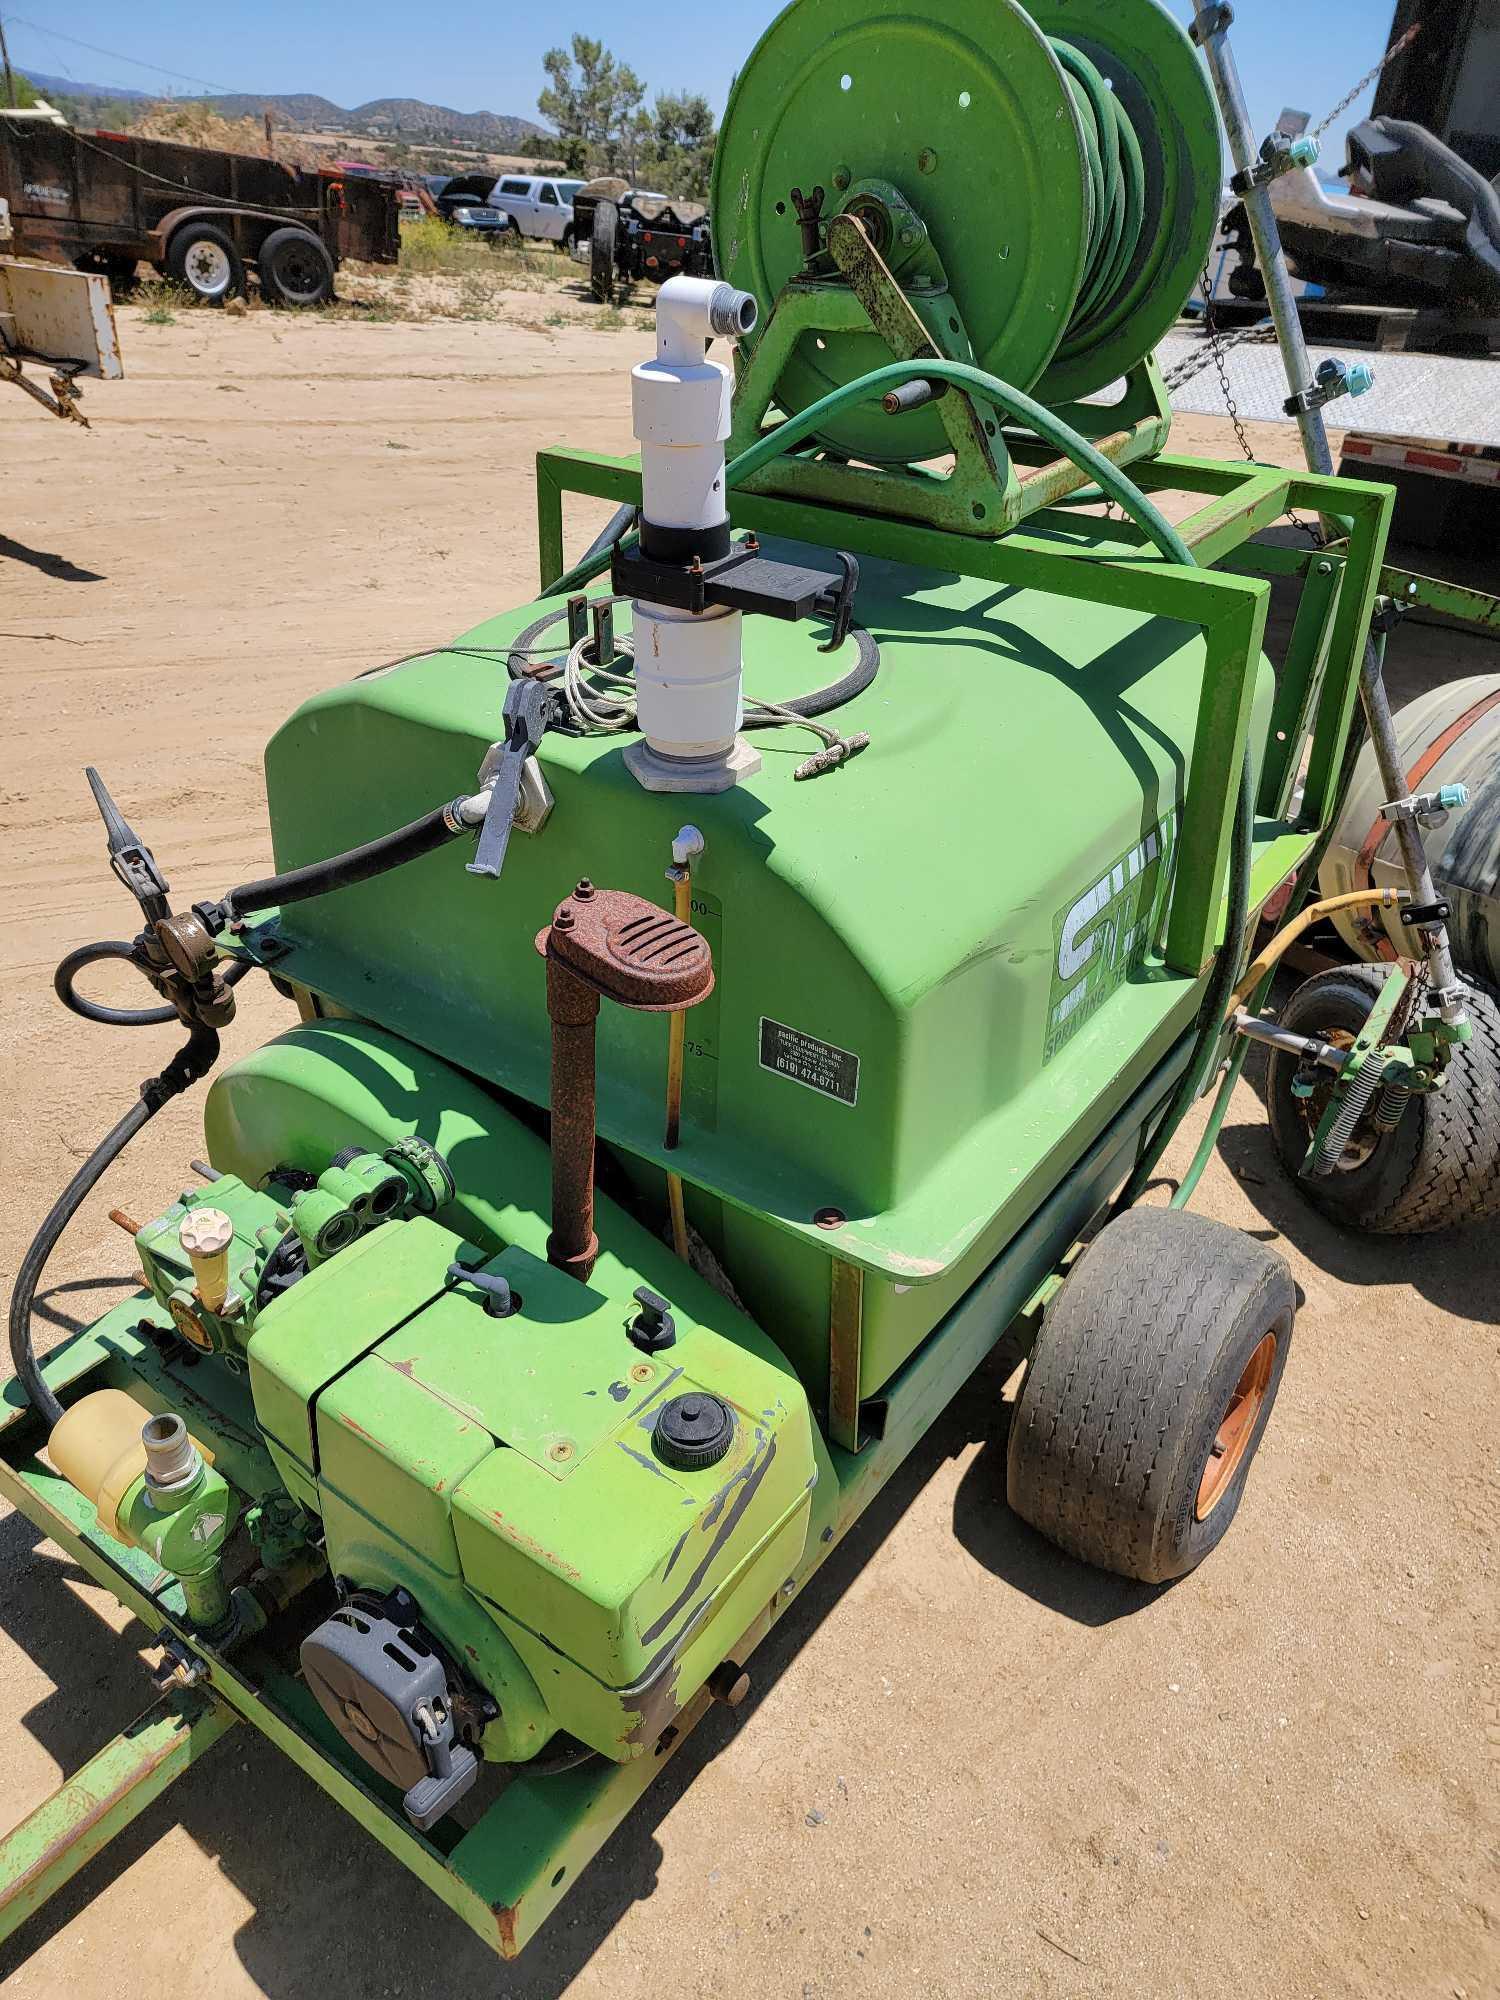 SDI Tow Behind Sprayer Machine Model 100D14-5K sold for parts only